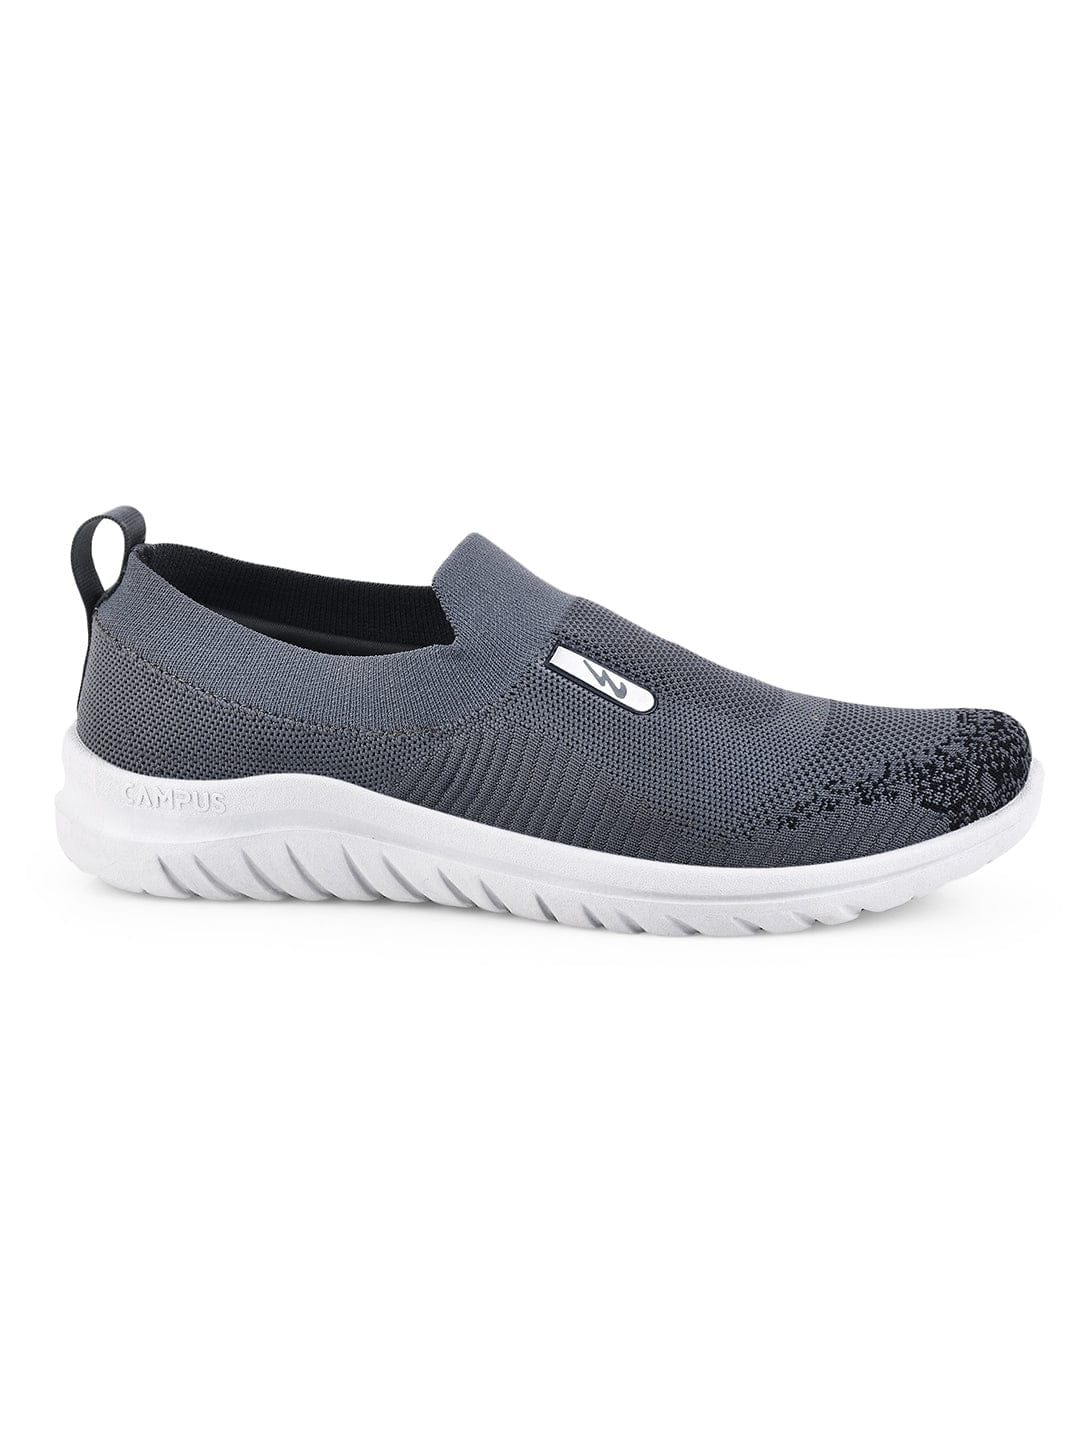 Buy Casual Shoes For Men: Gale-2-D-Gry-Blu | Campus Shoes